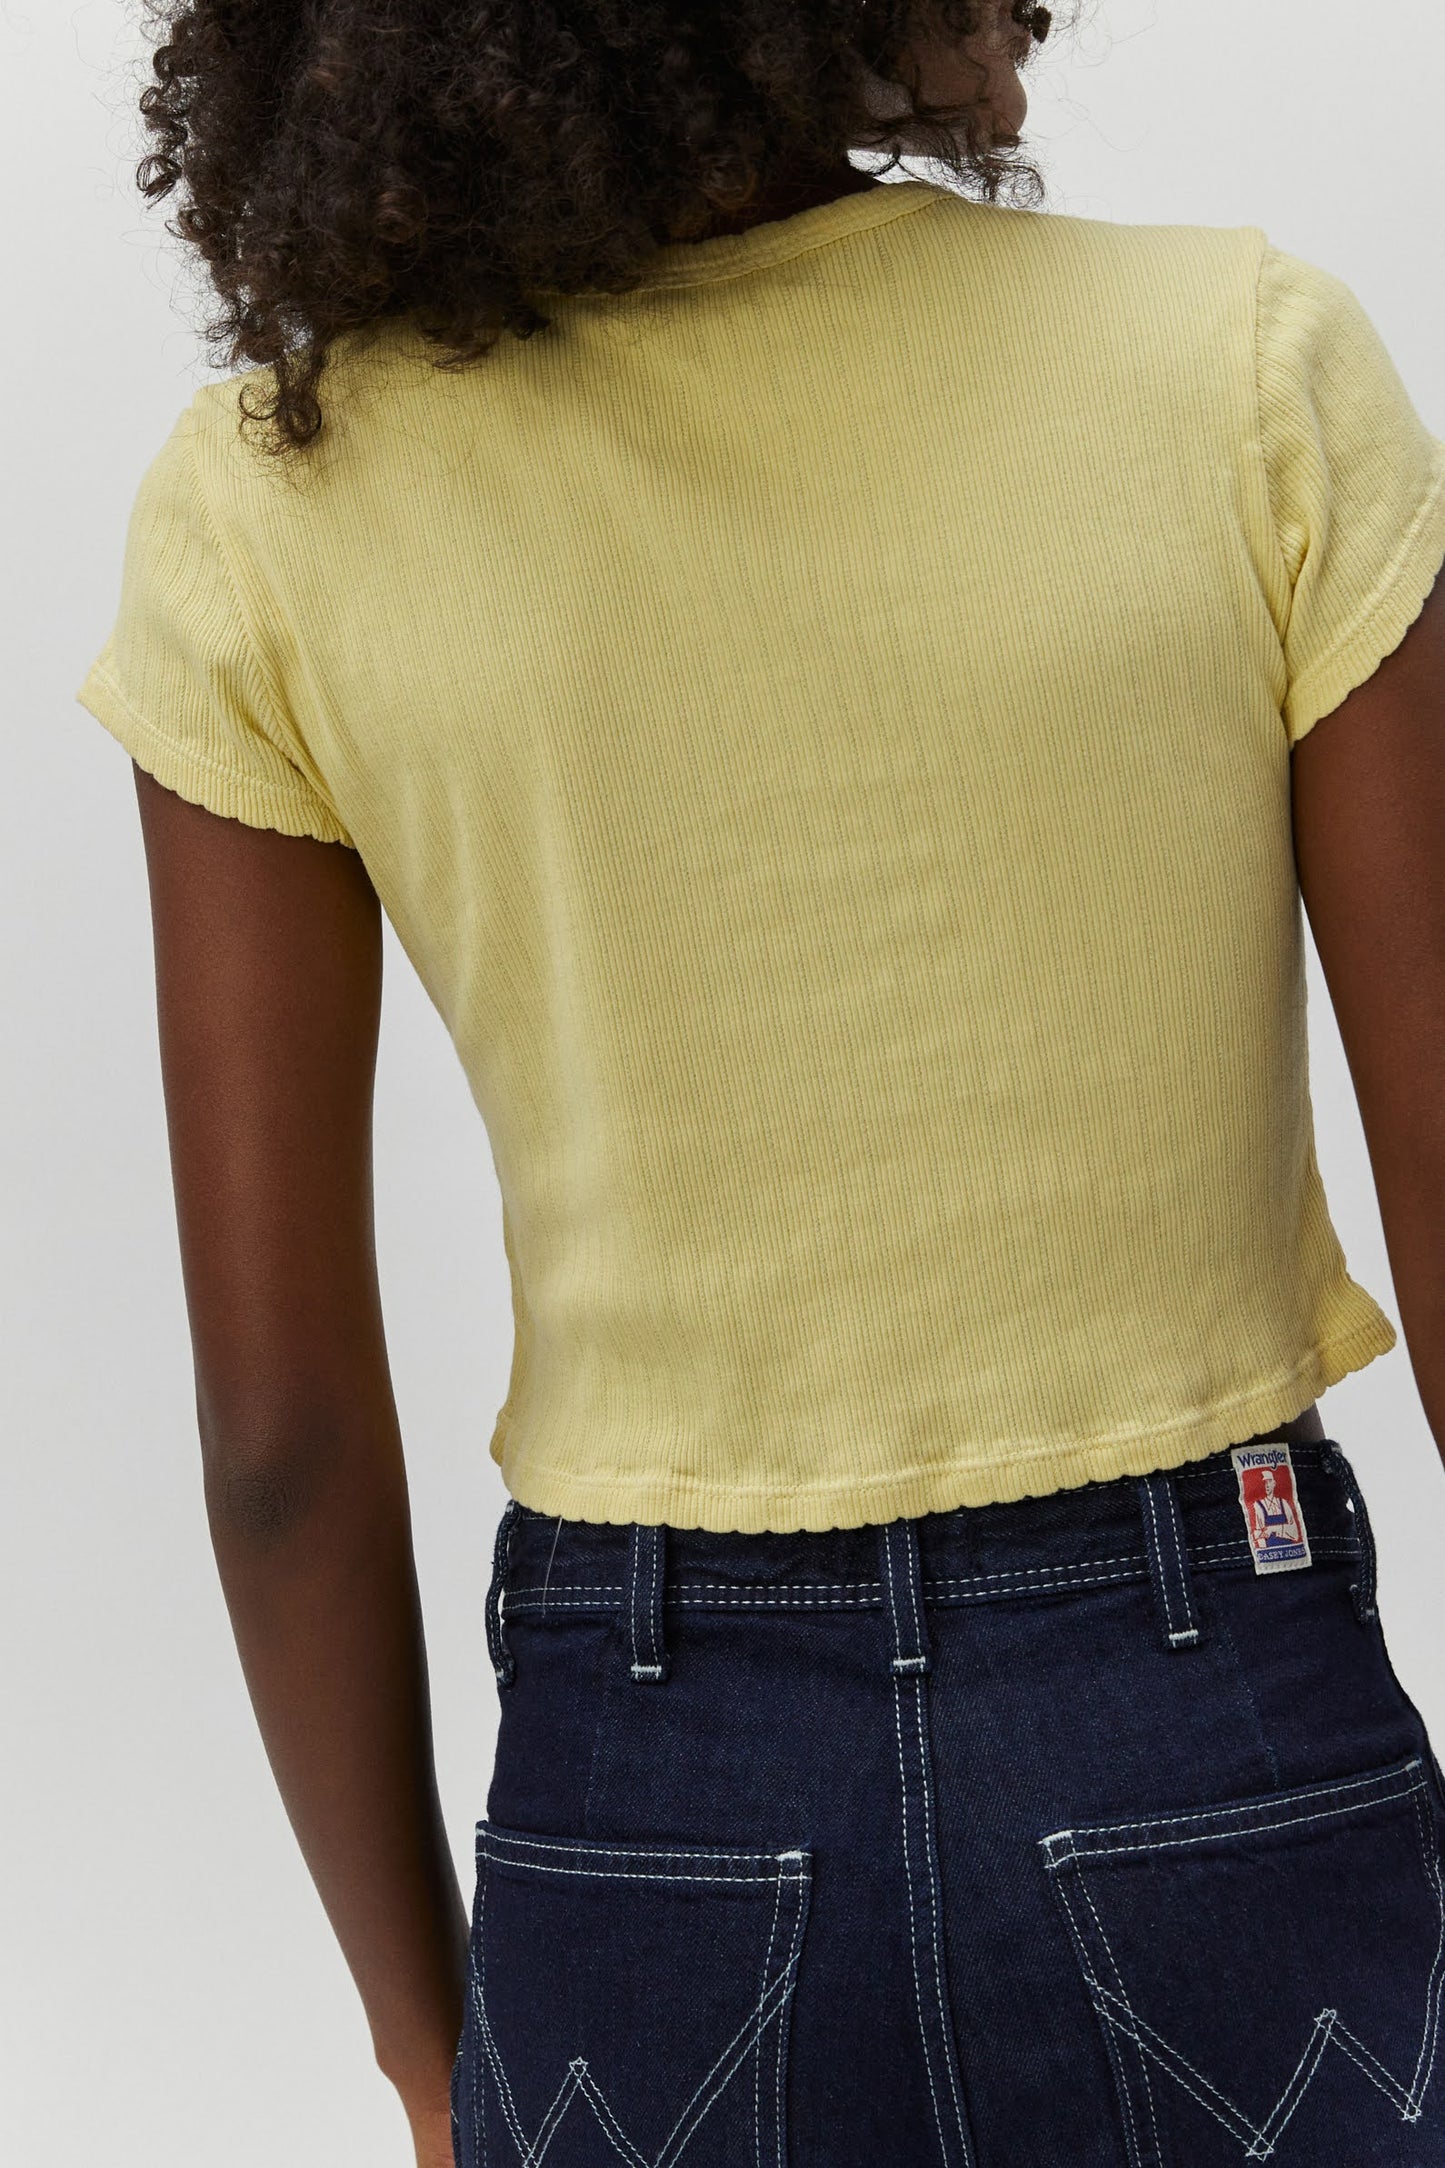 Curly haired model wearing a pointelle knit crop tee in yellow.